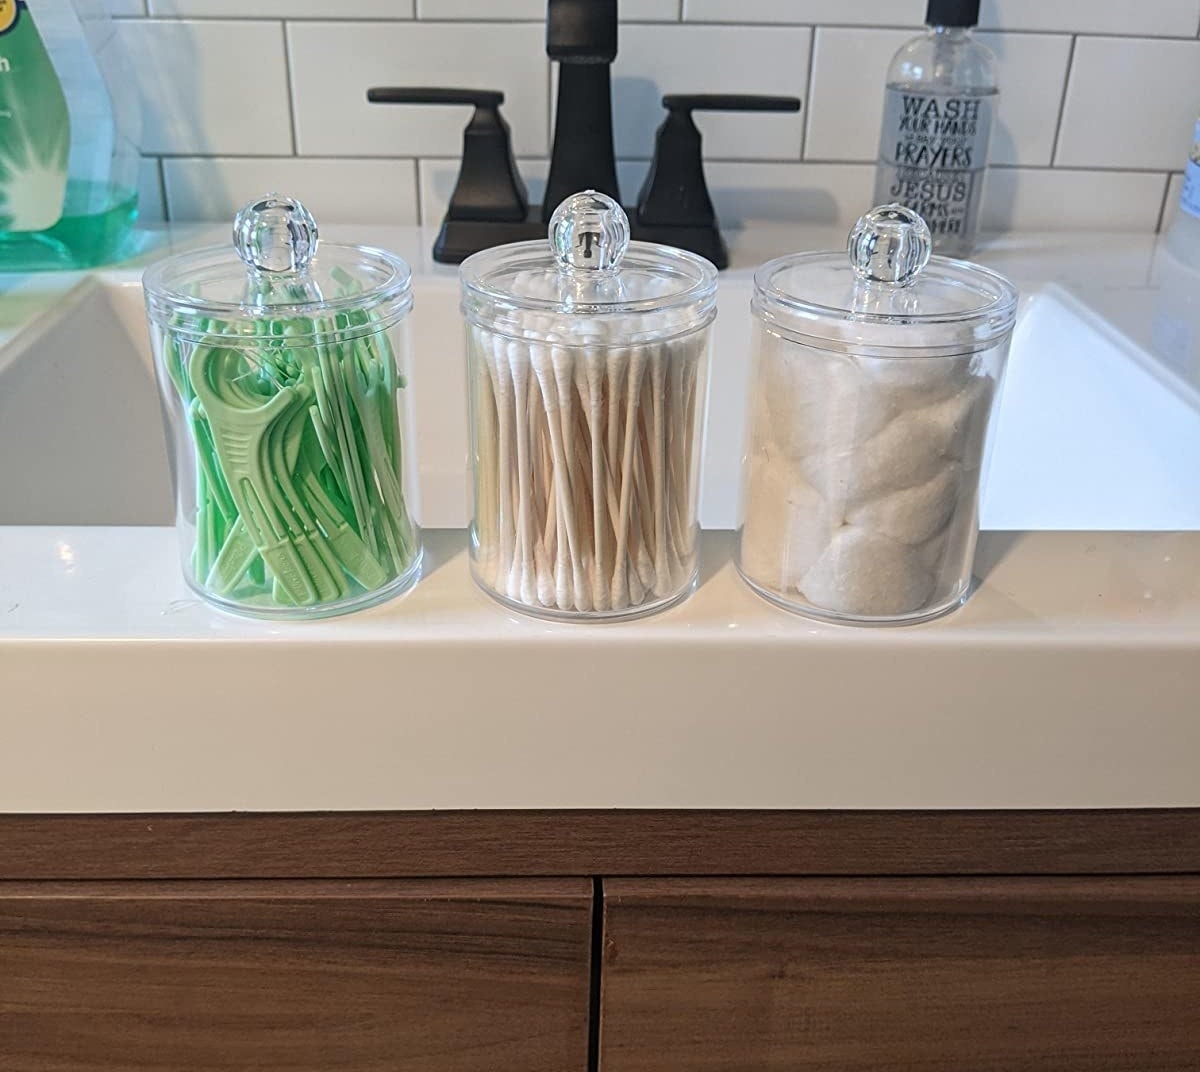 the three clear jars filled with flossers, Q-tips, and cotton balls